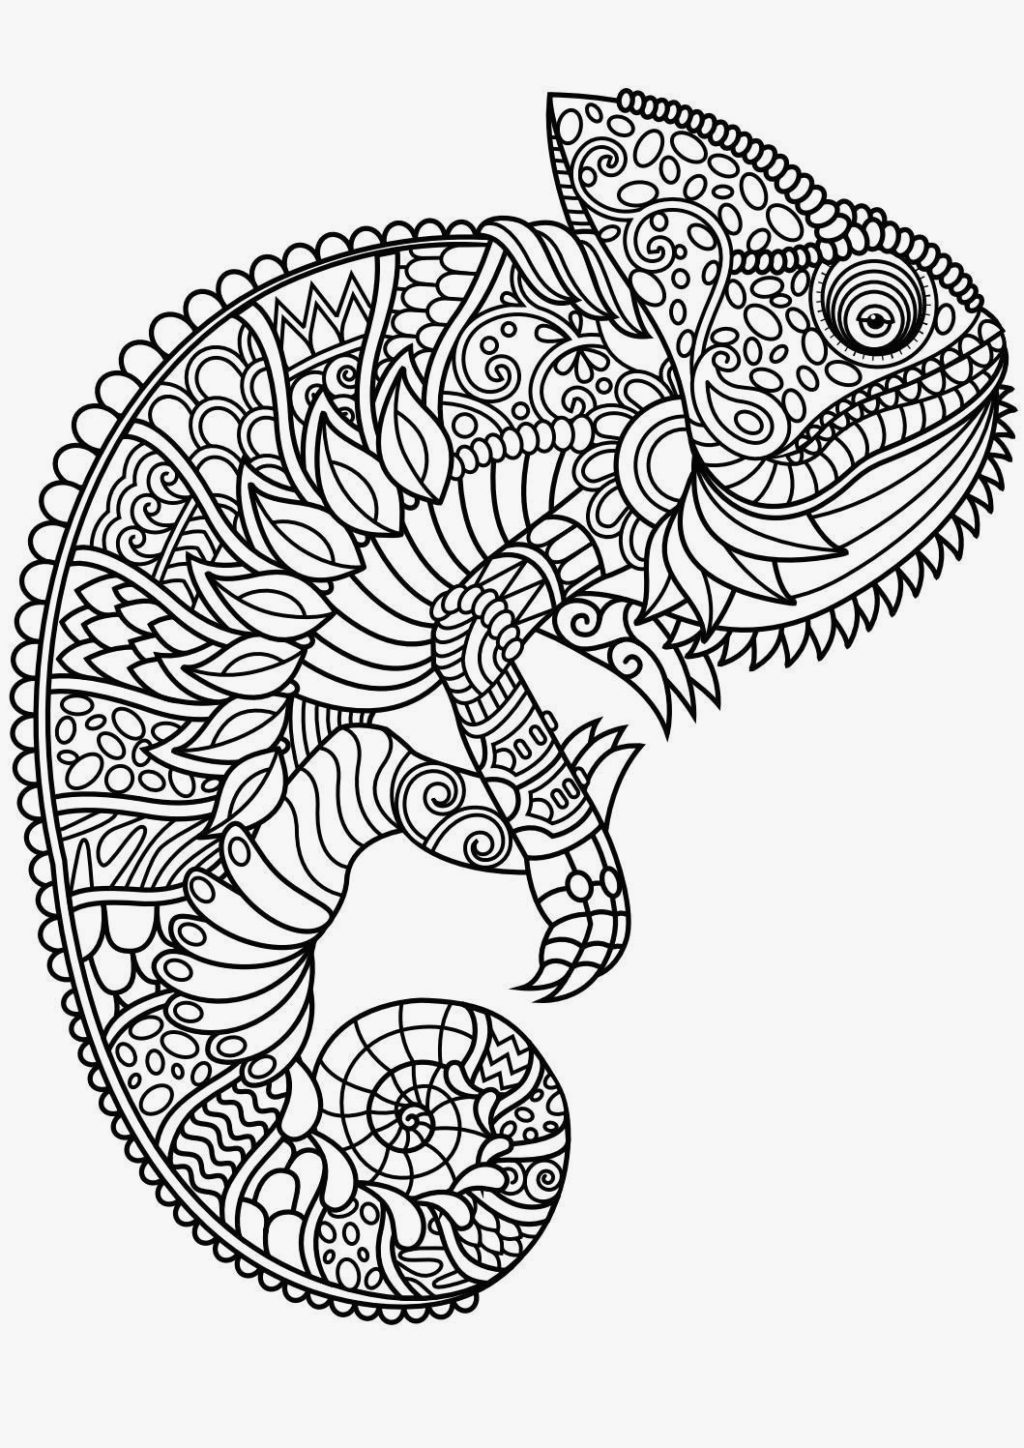 The best colouring pages for kids for long days at home